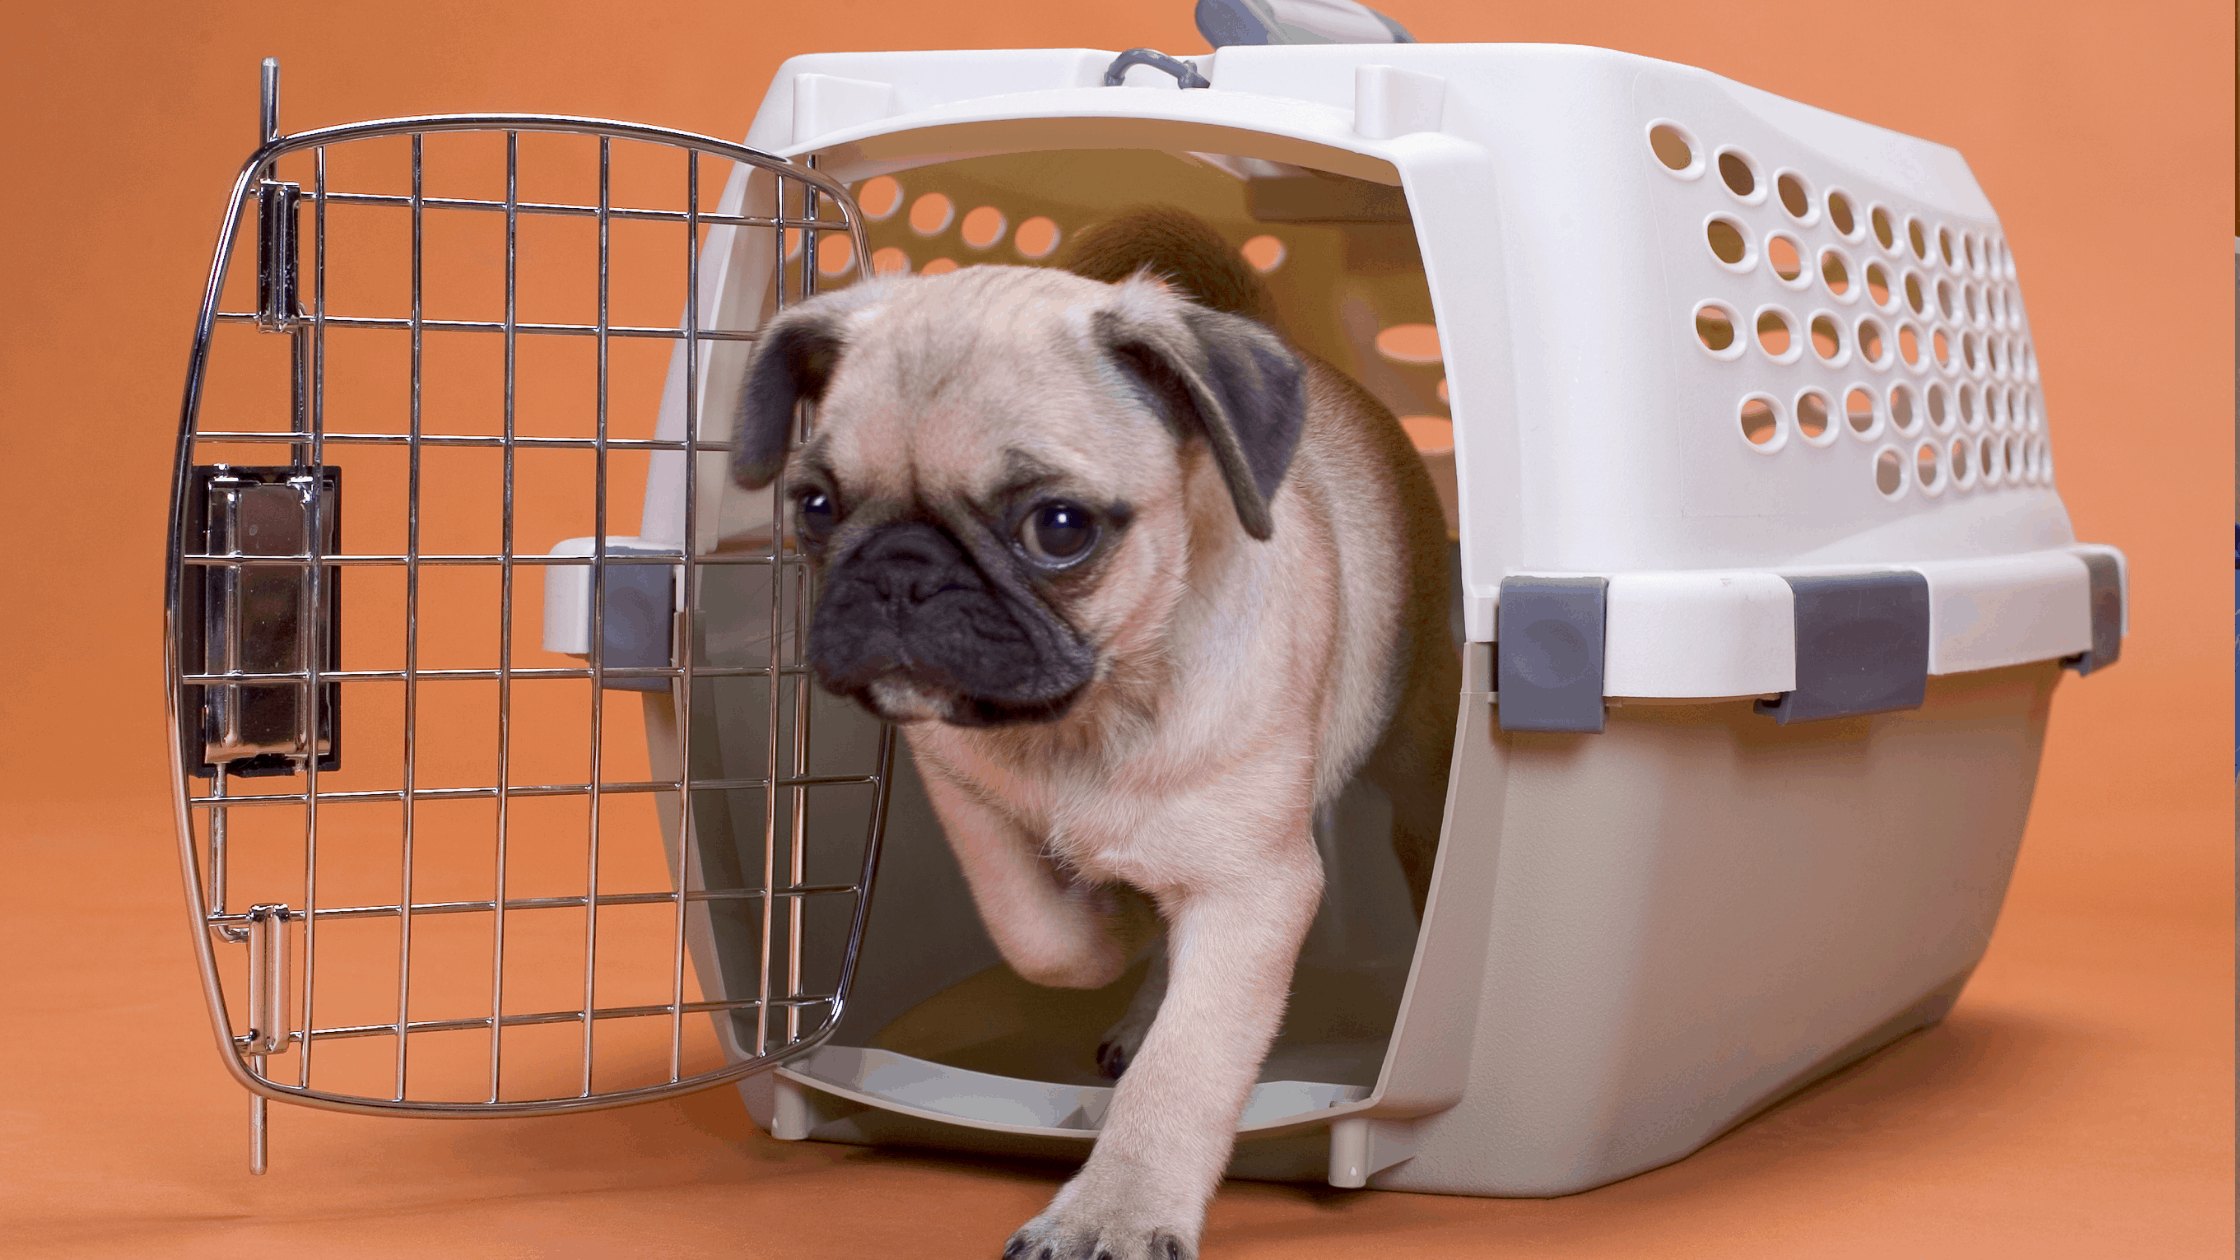 How To Soundproof Dog Crate For Fireworks, Thunderstorms